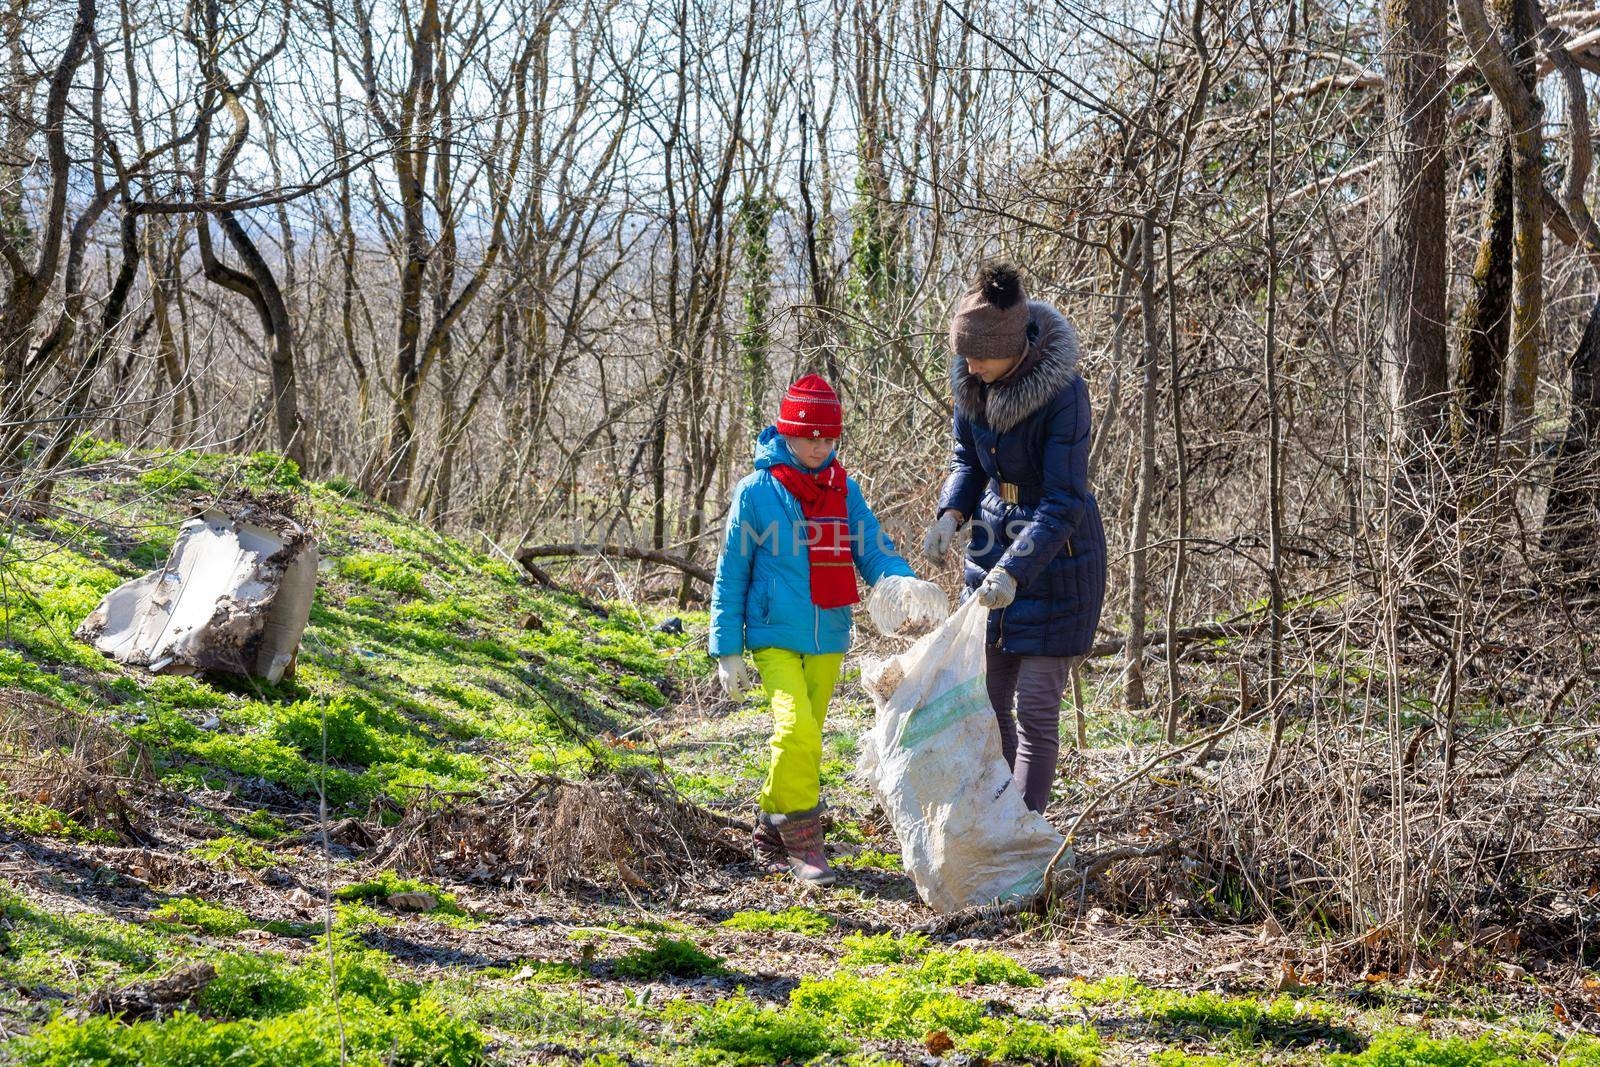 Family collects trash in the forest in a big bag for recycling